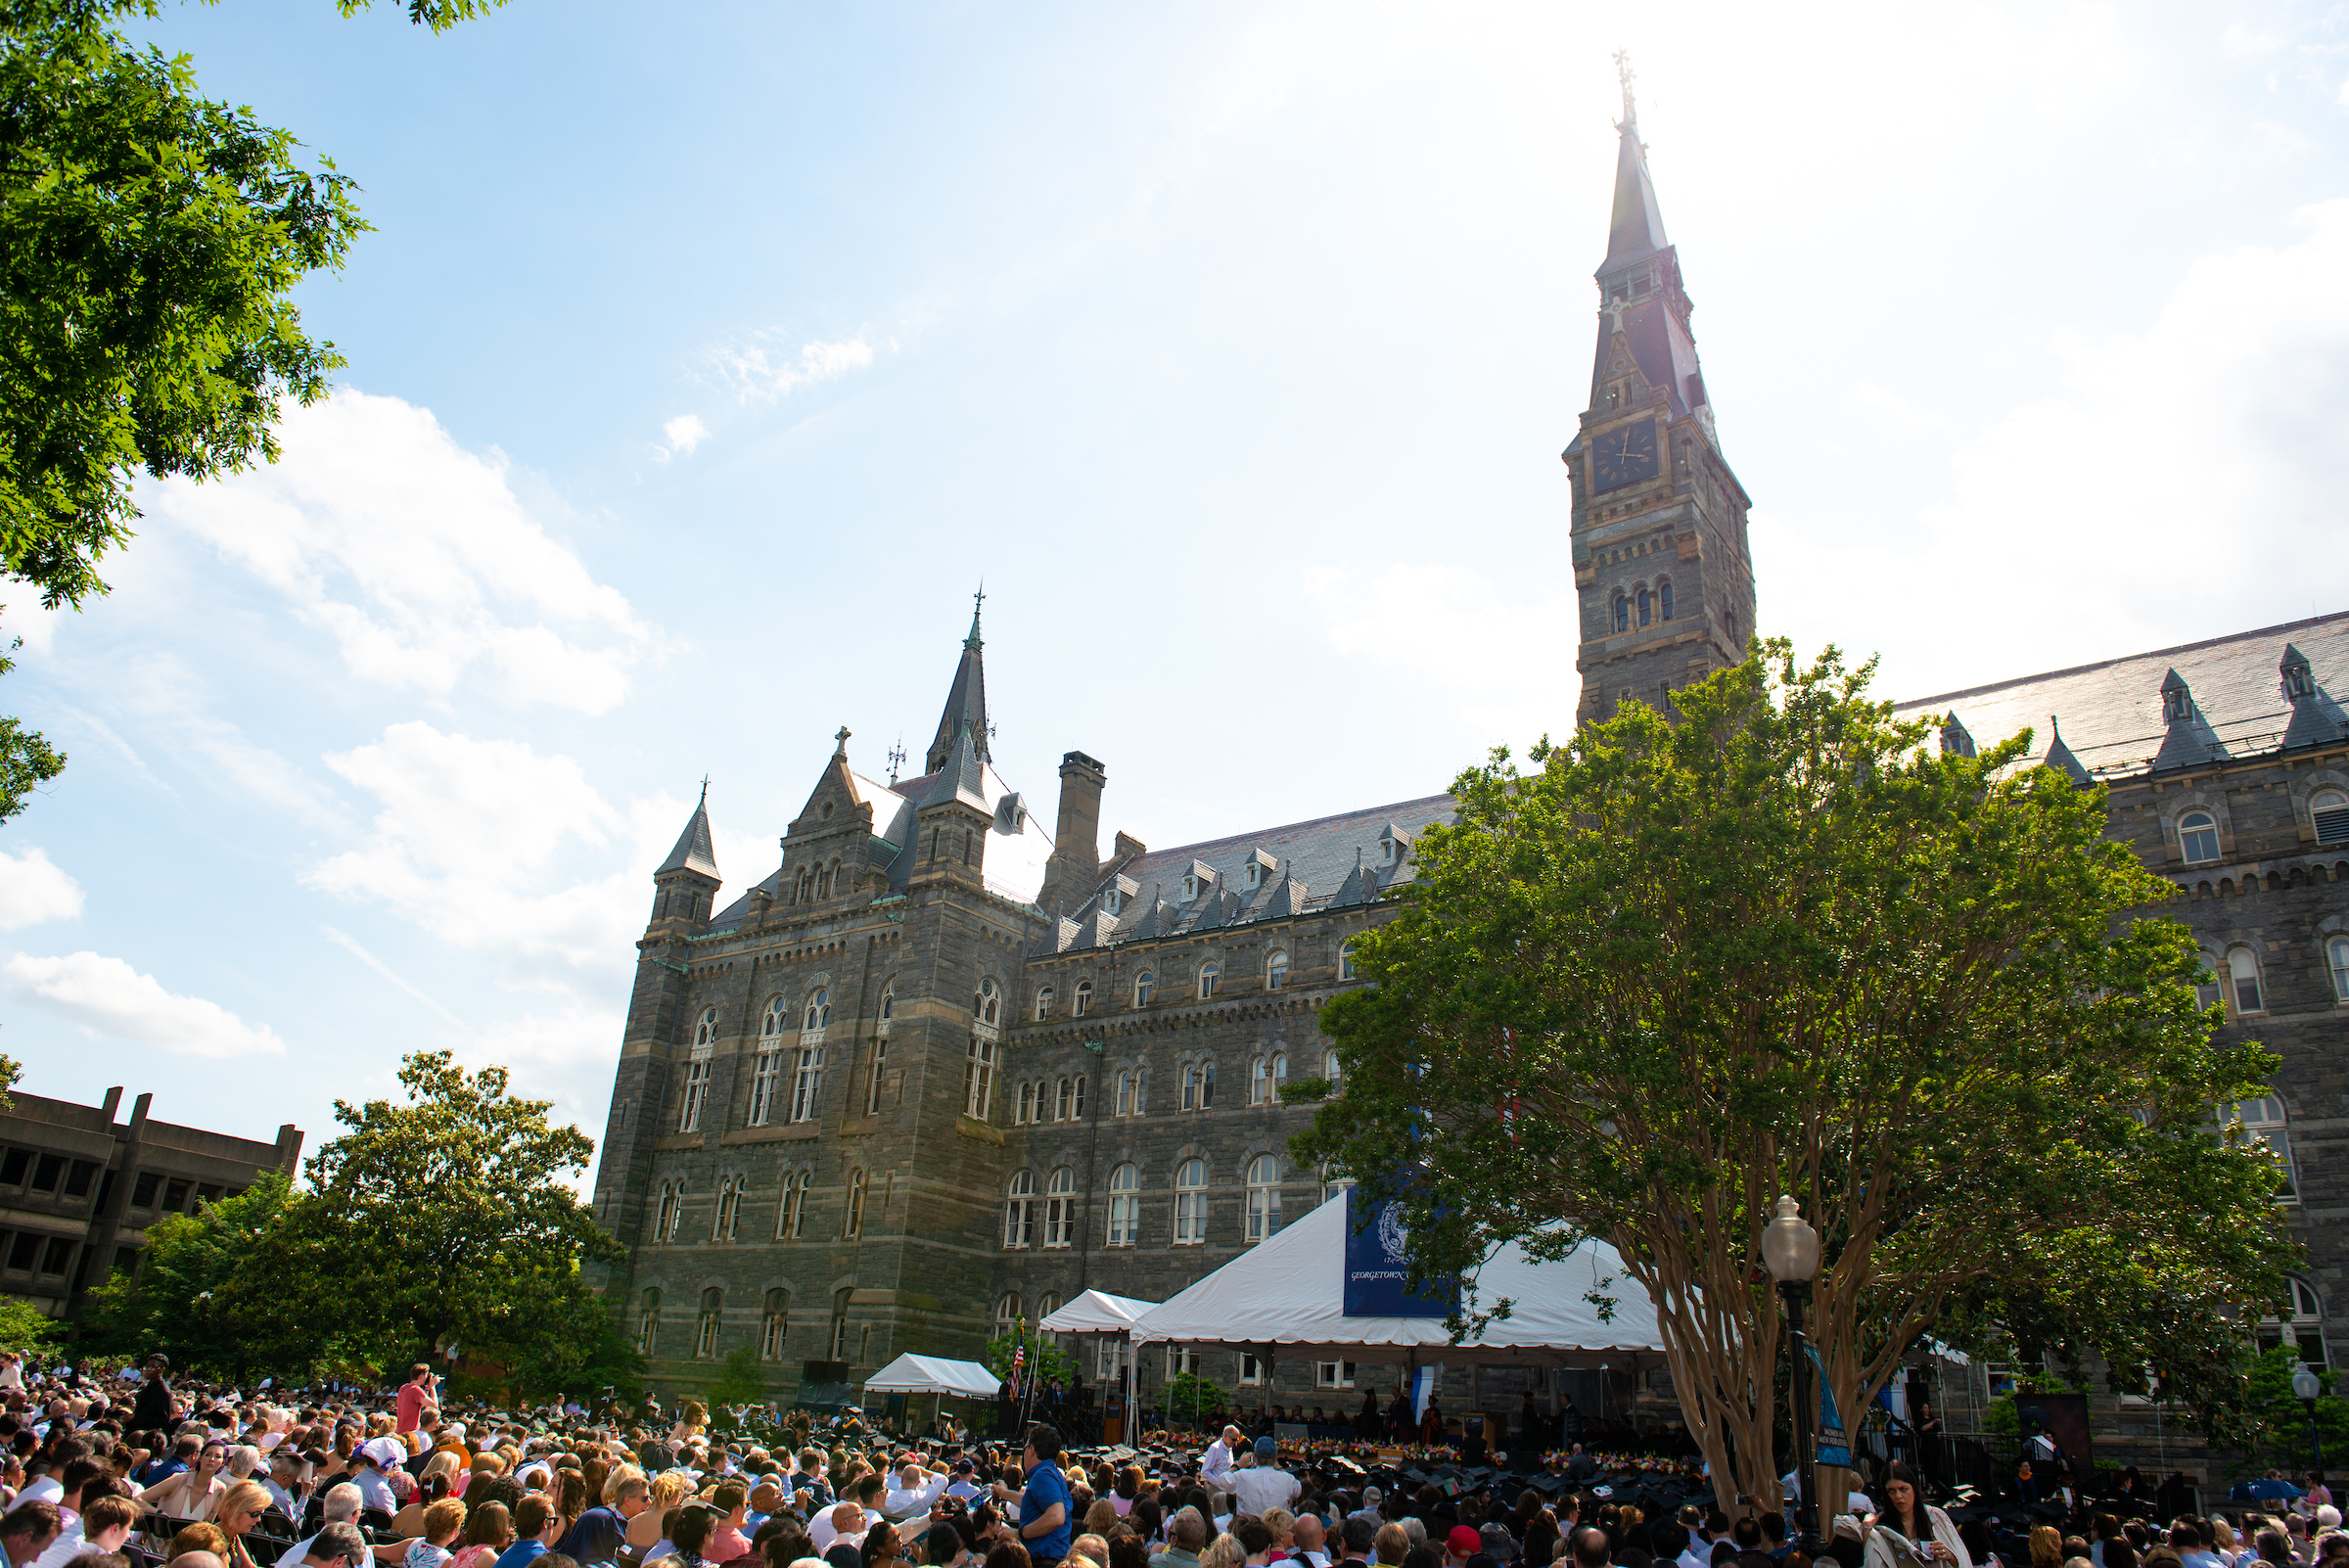 Commencement crowd in seats in front of Healy Hall with the sun shining behind the clock tower